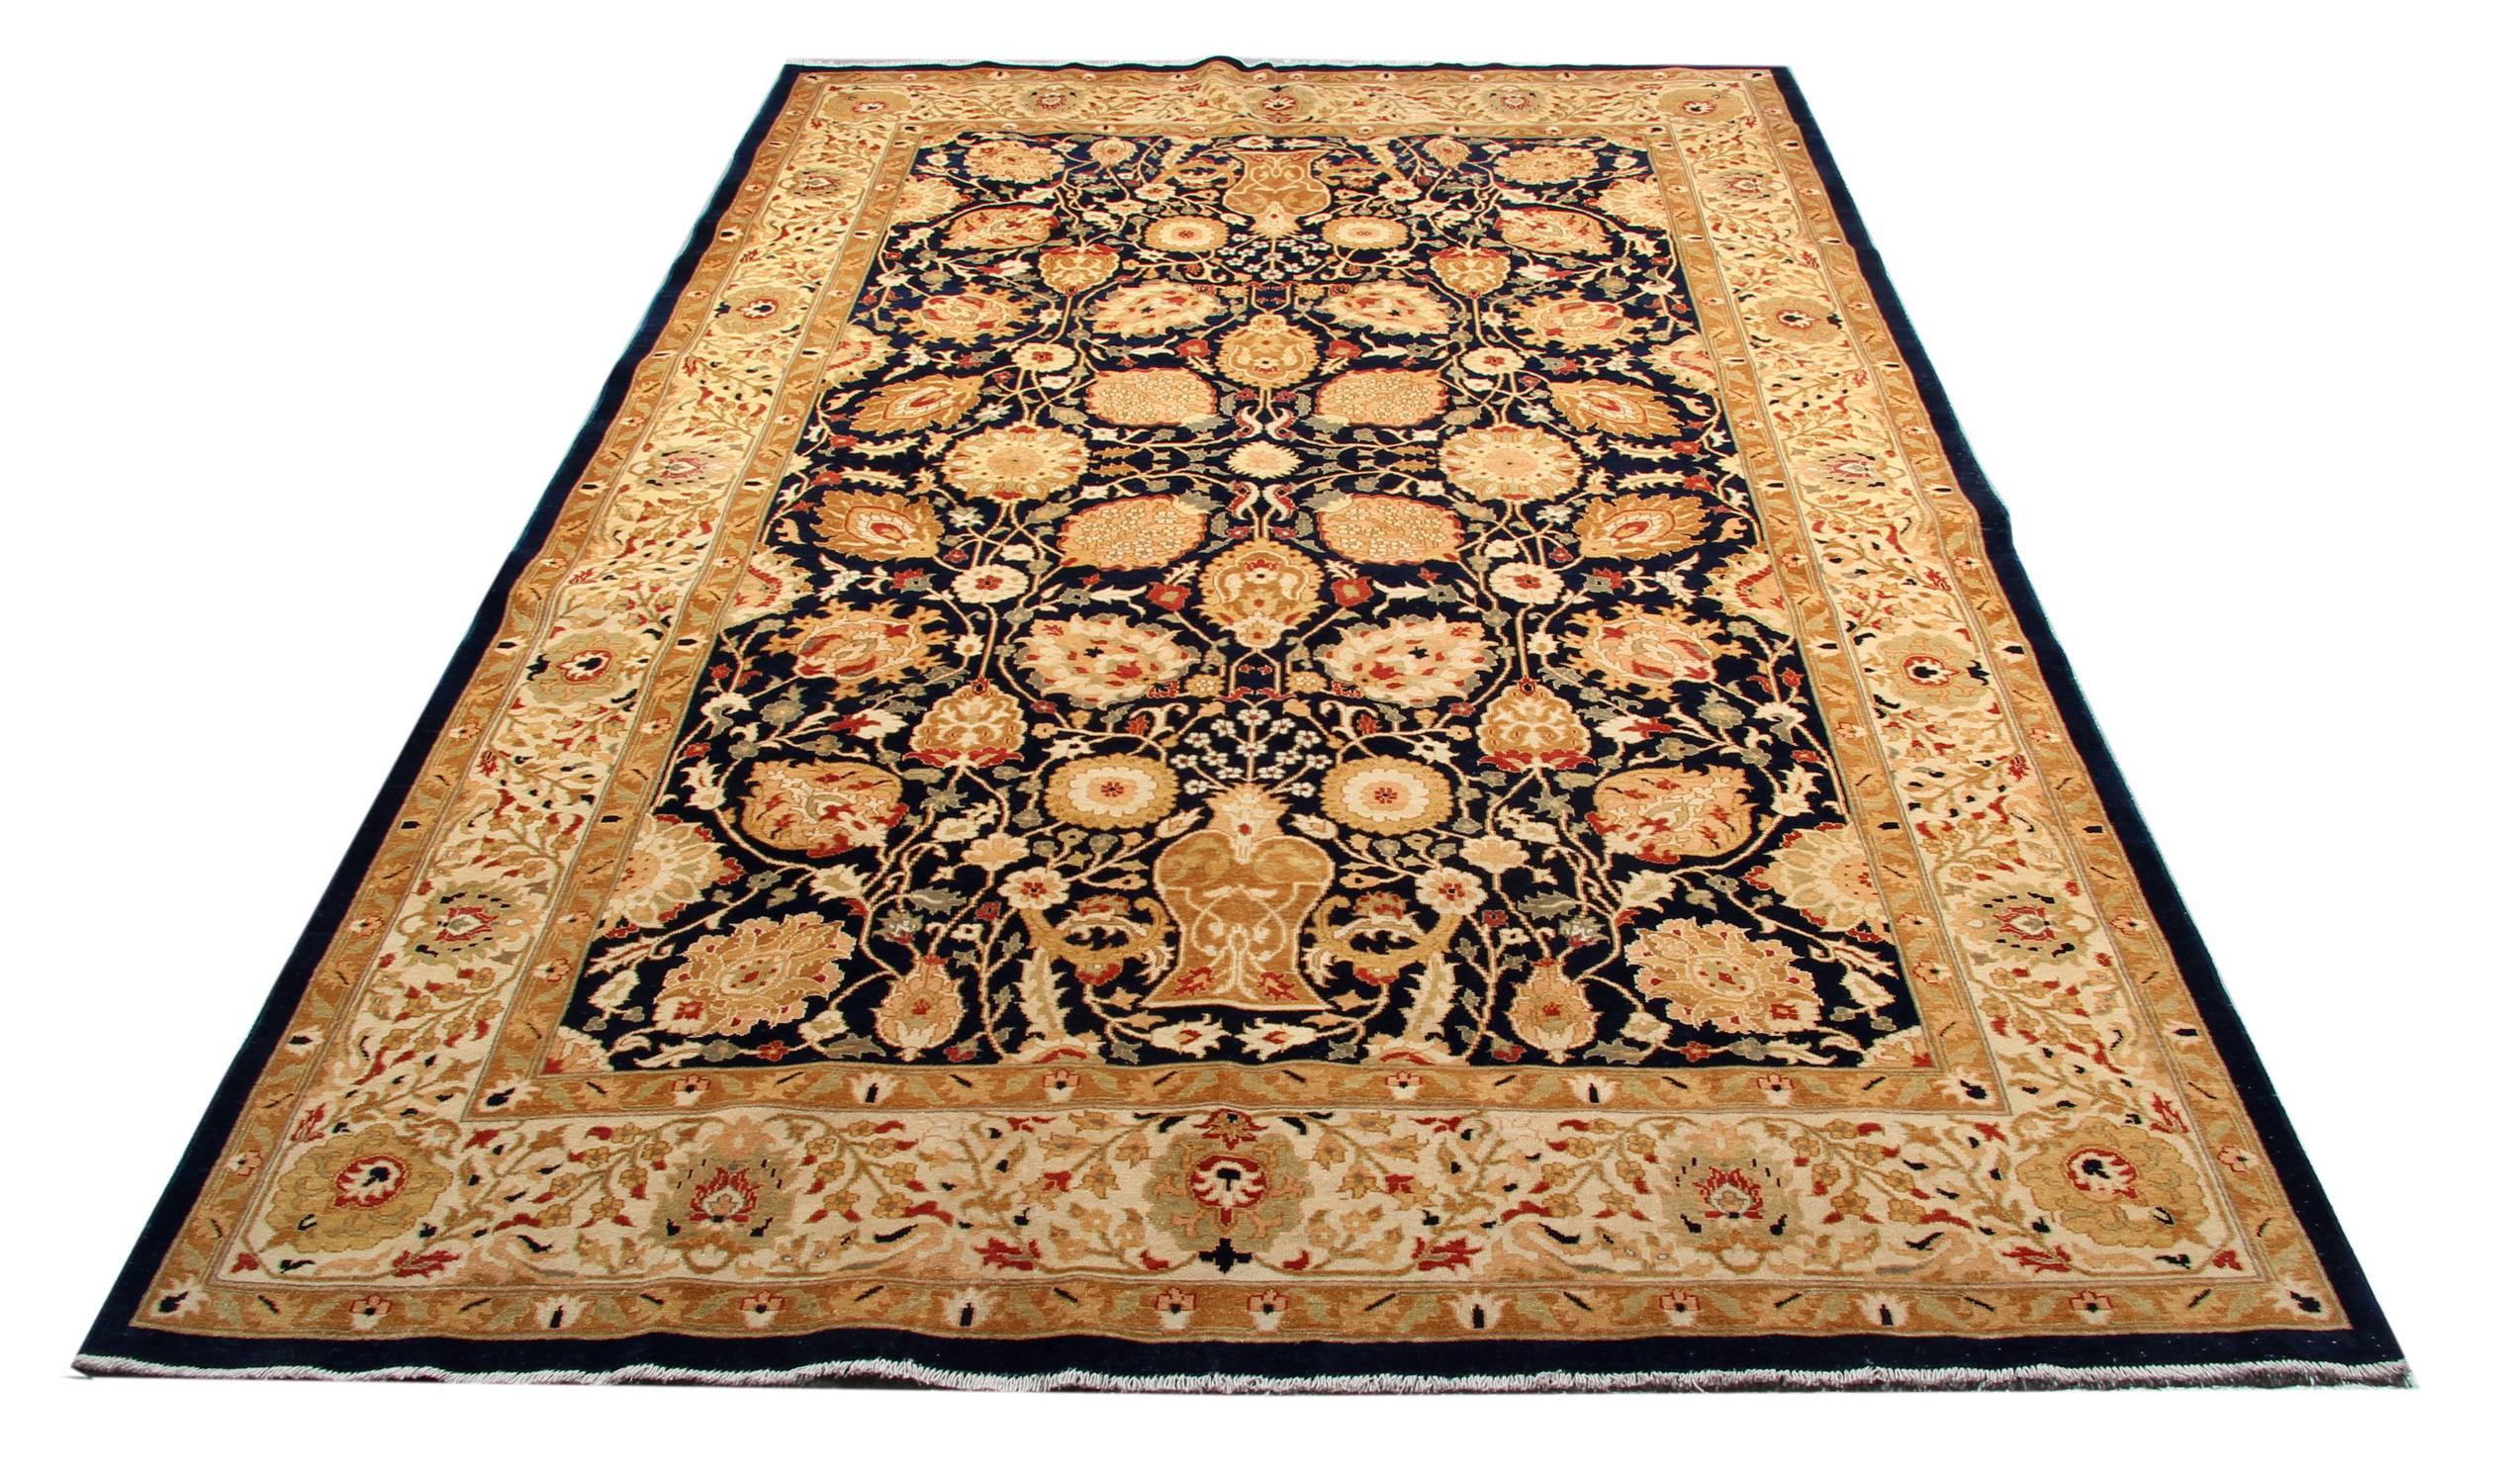 This handmade carpet gold oriental rug is a Ziegler style Sultanabad woven rug made on our looms by our master weavers in Afghanistan. These floral patterned rugs kind of our luxury rugs made of our own looms by our master weavers of Afghan rugs,